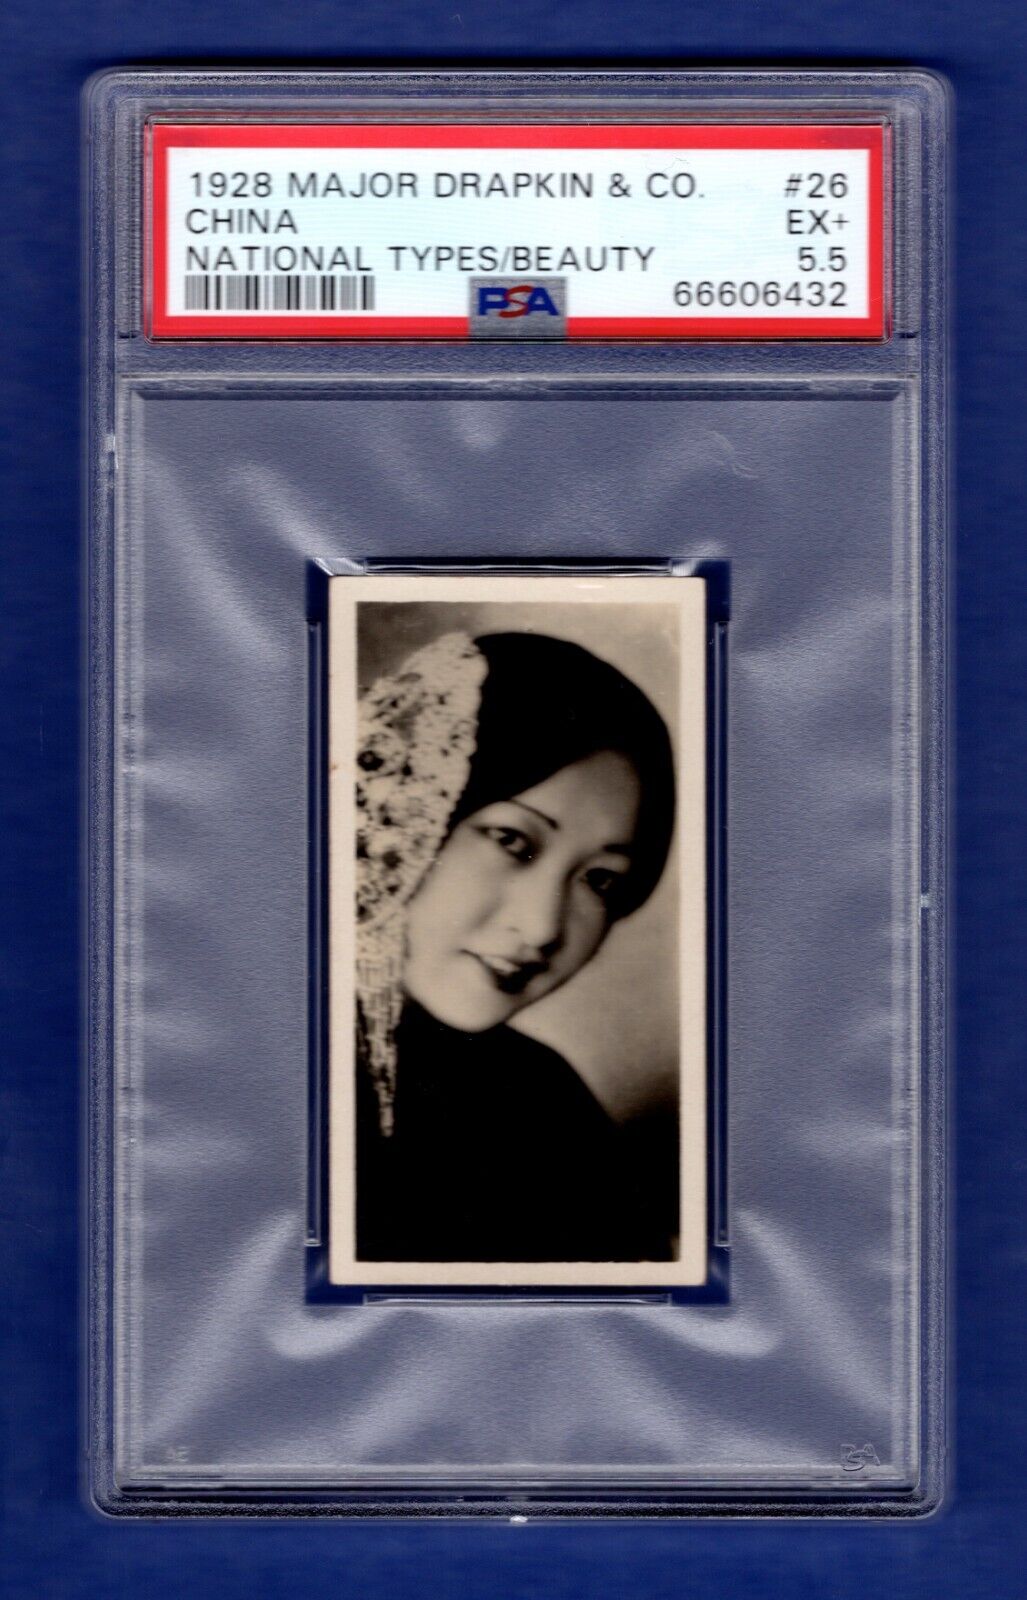 PSA 5.5 ANNA MAY WONG  1928 Drapkin #26 THE HIGHEST EVER GRADED 1/1 ROOKIE CARD